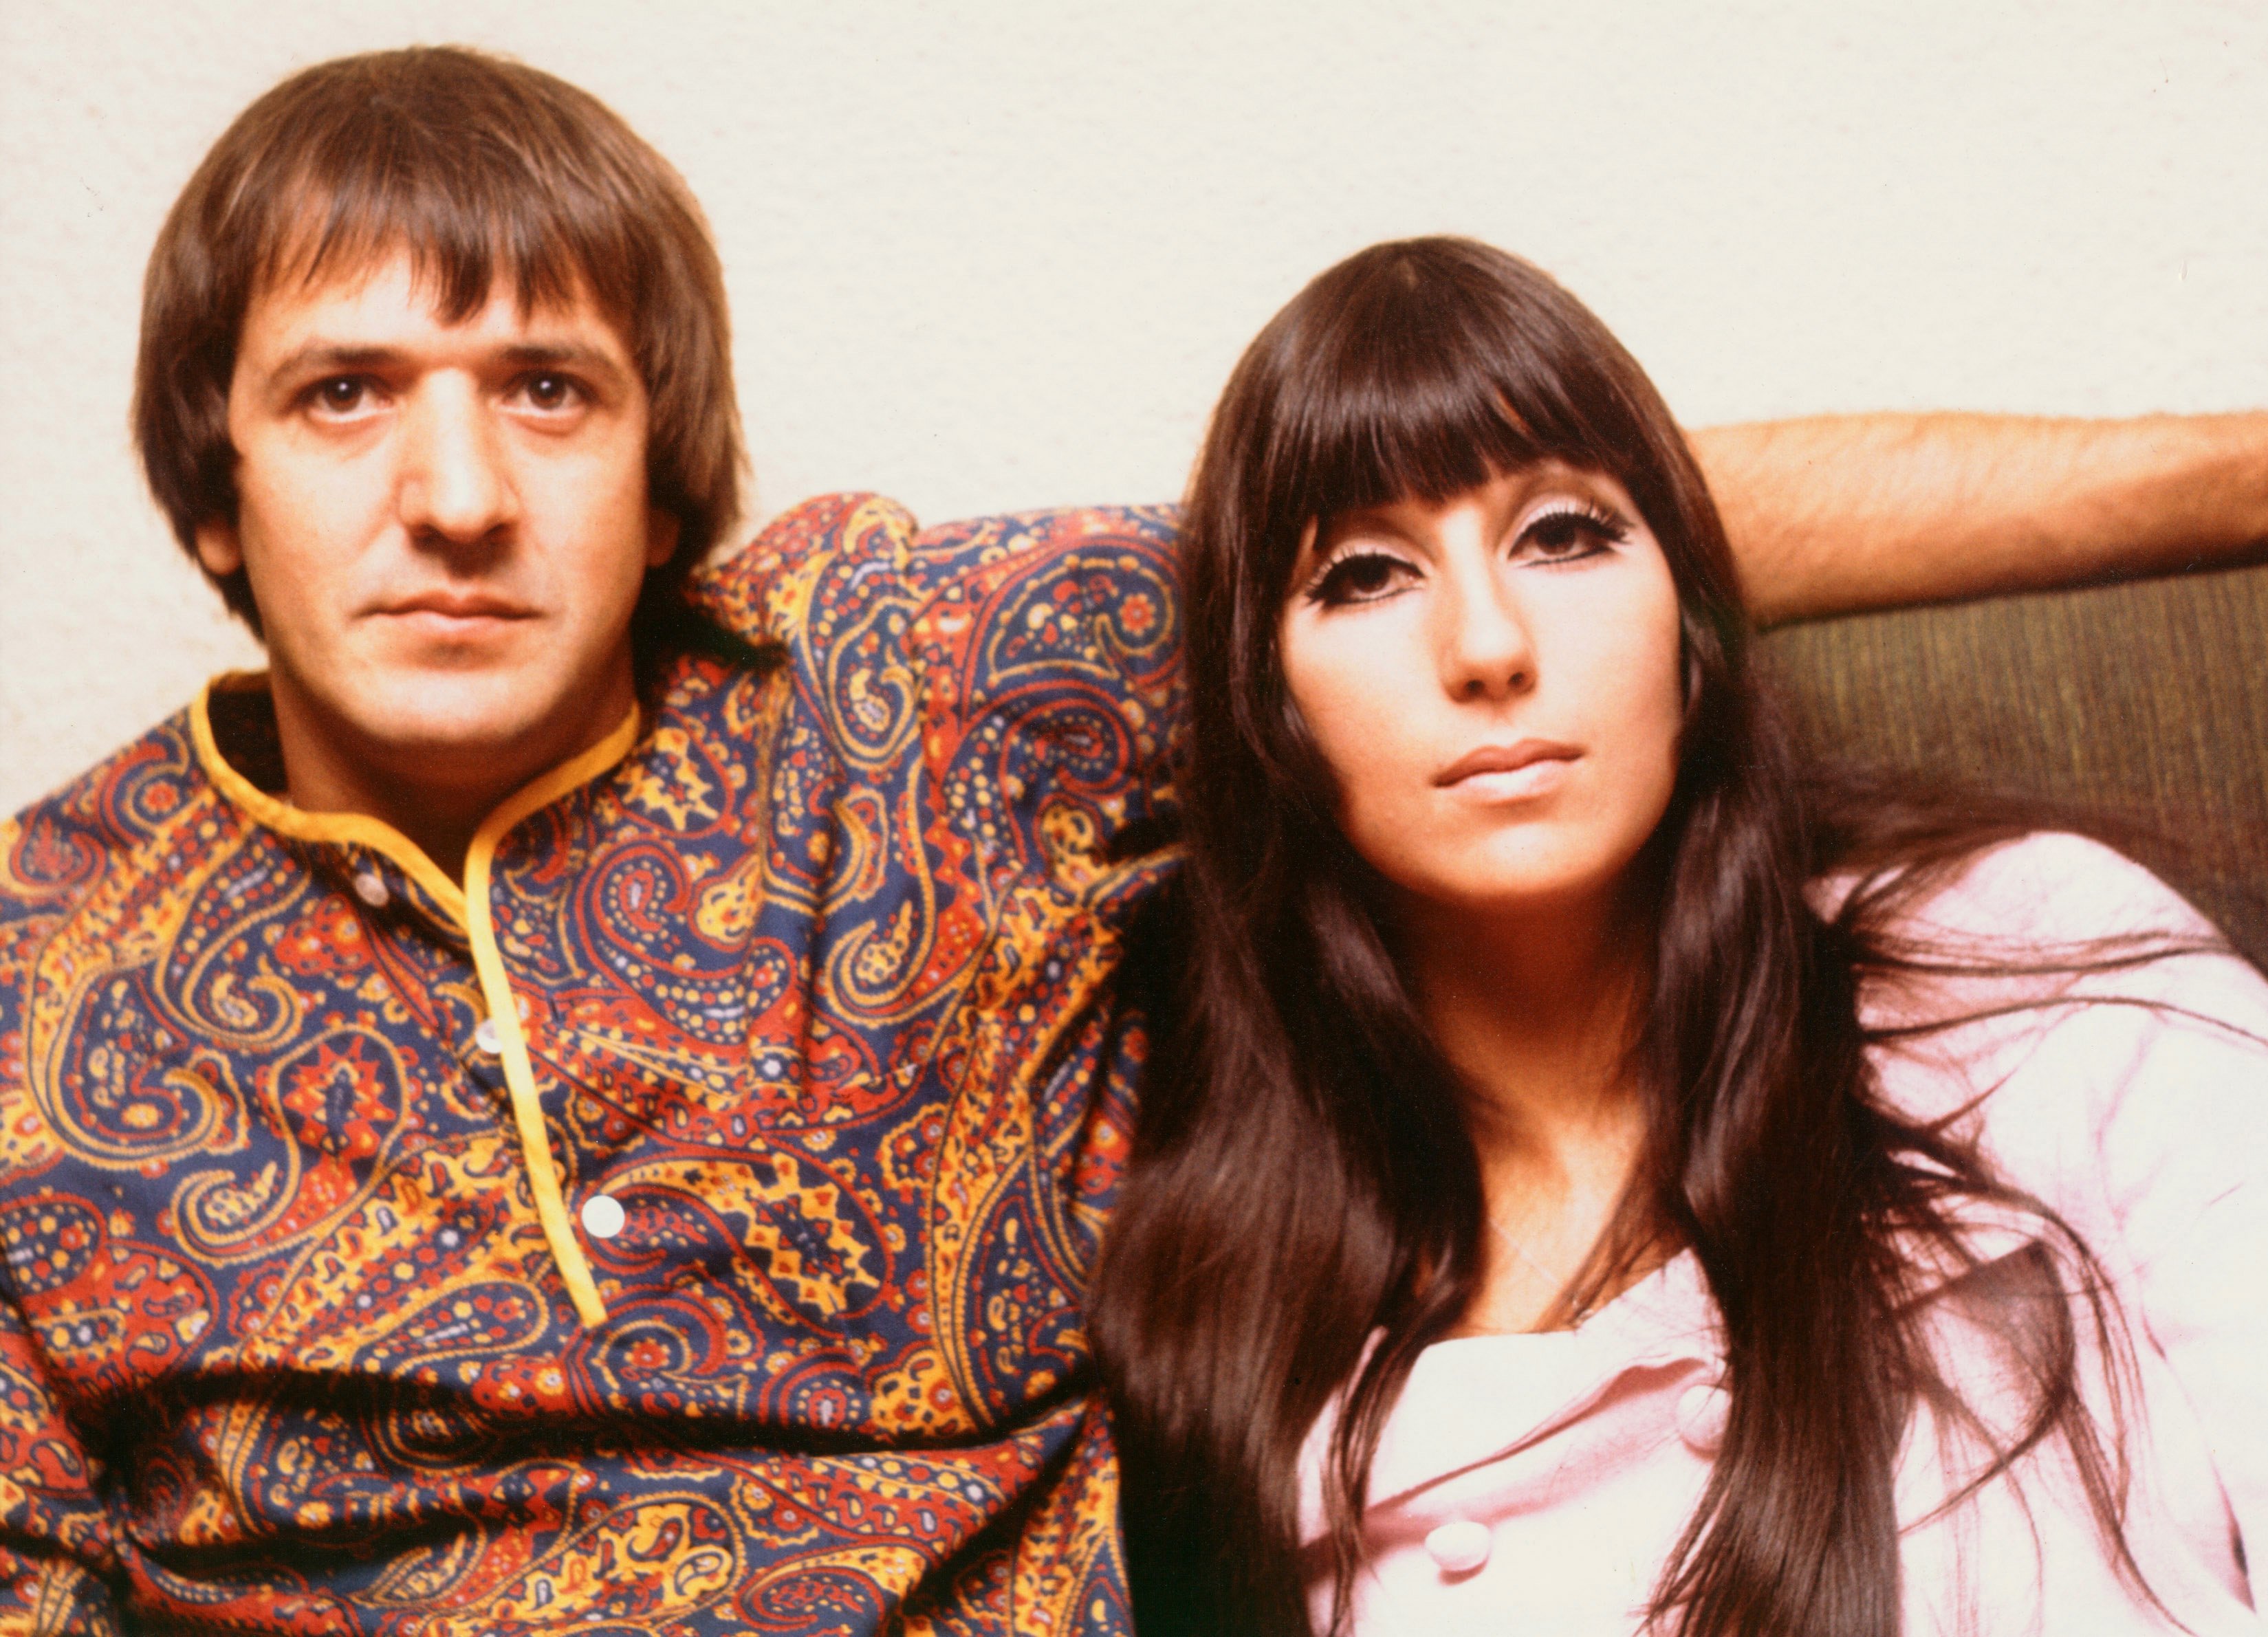 Sonny & Cher on a couch